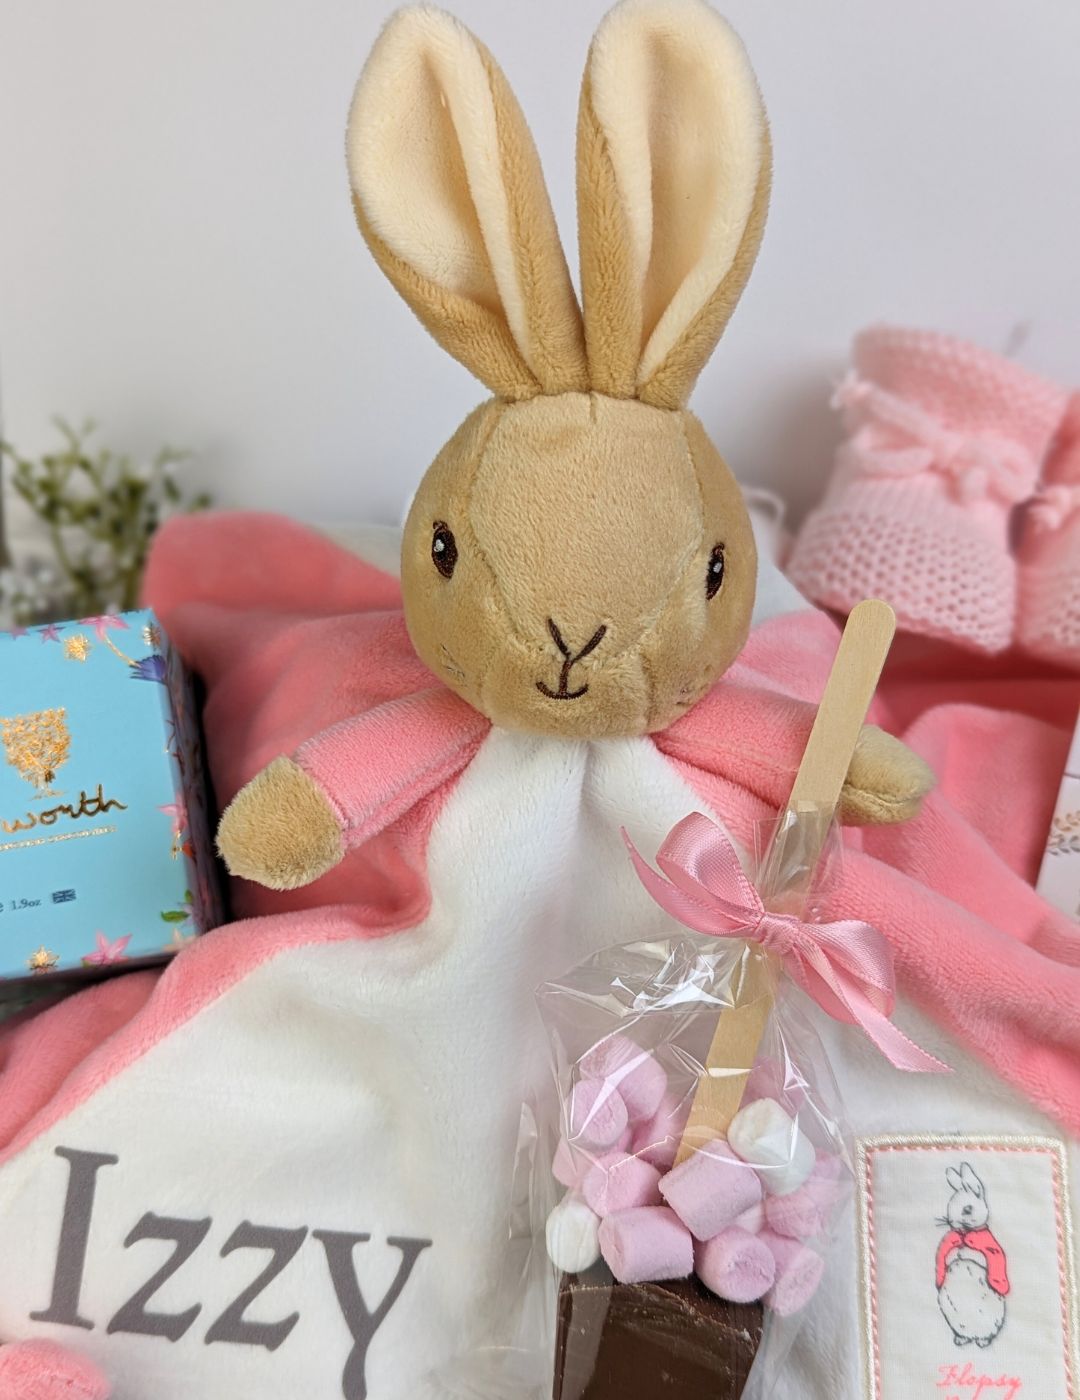 new mum and baby girl gift box with flopsy bunny comforter and chocolates.